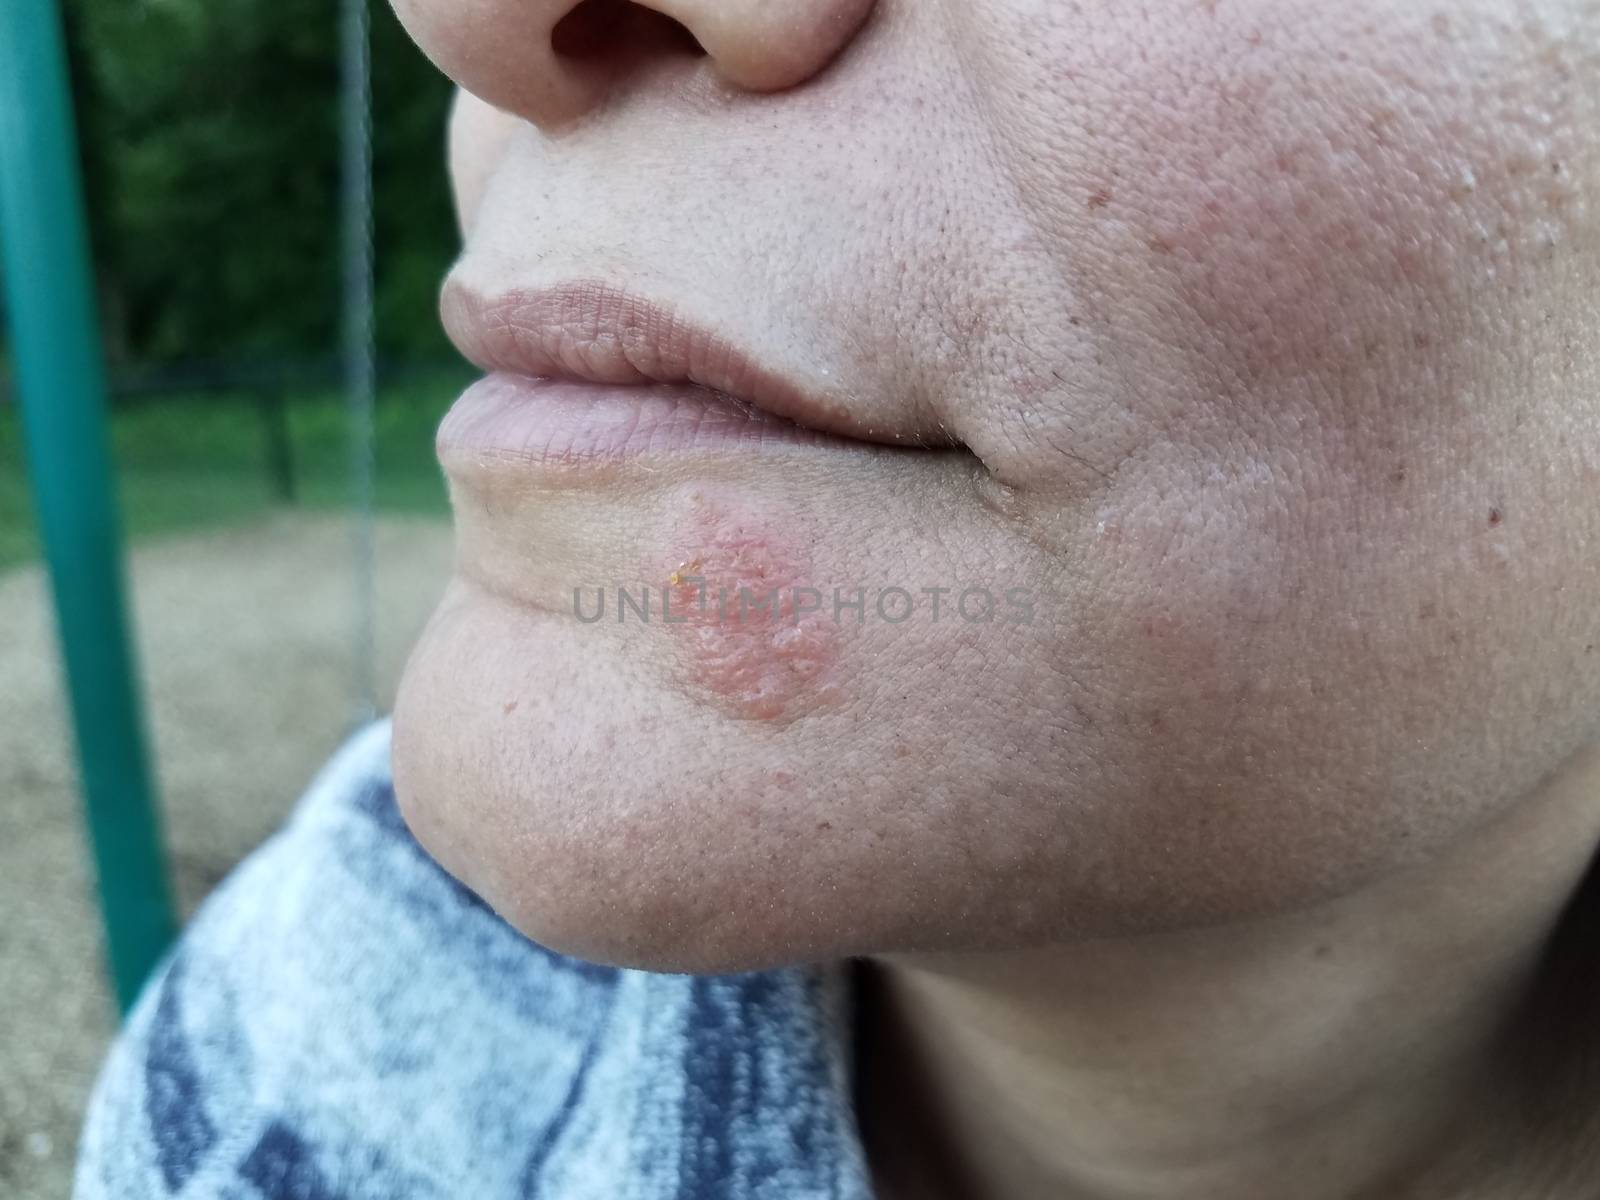 red itchy rash or sore and blister on woman's chin and face